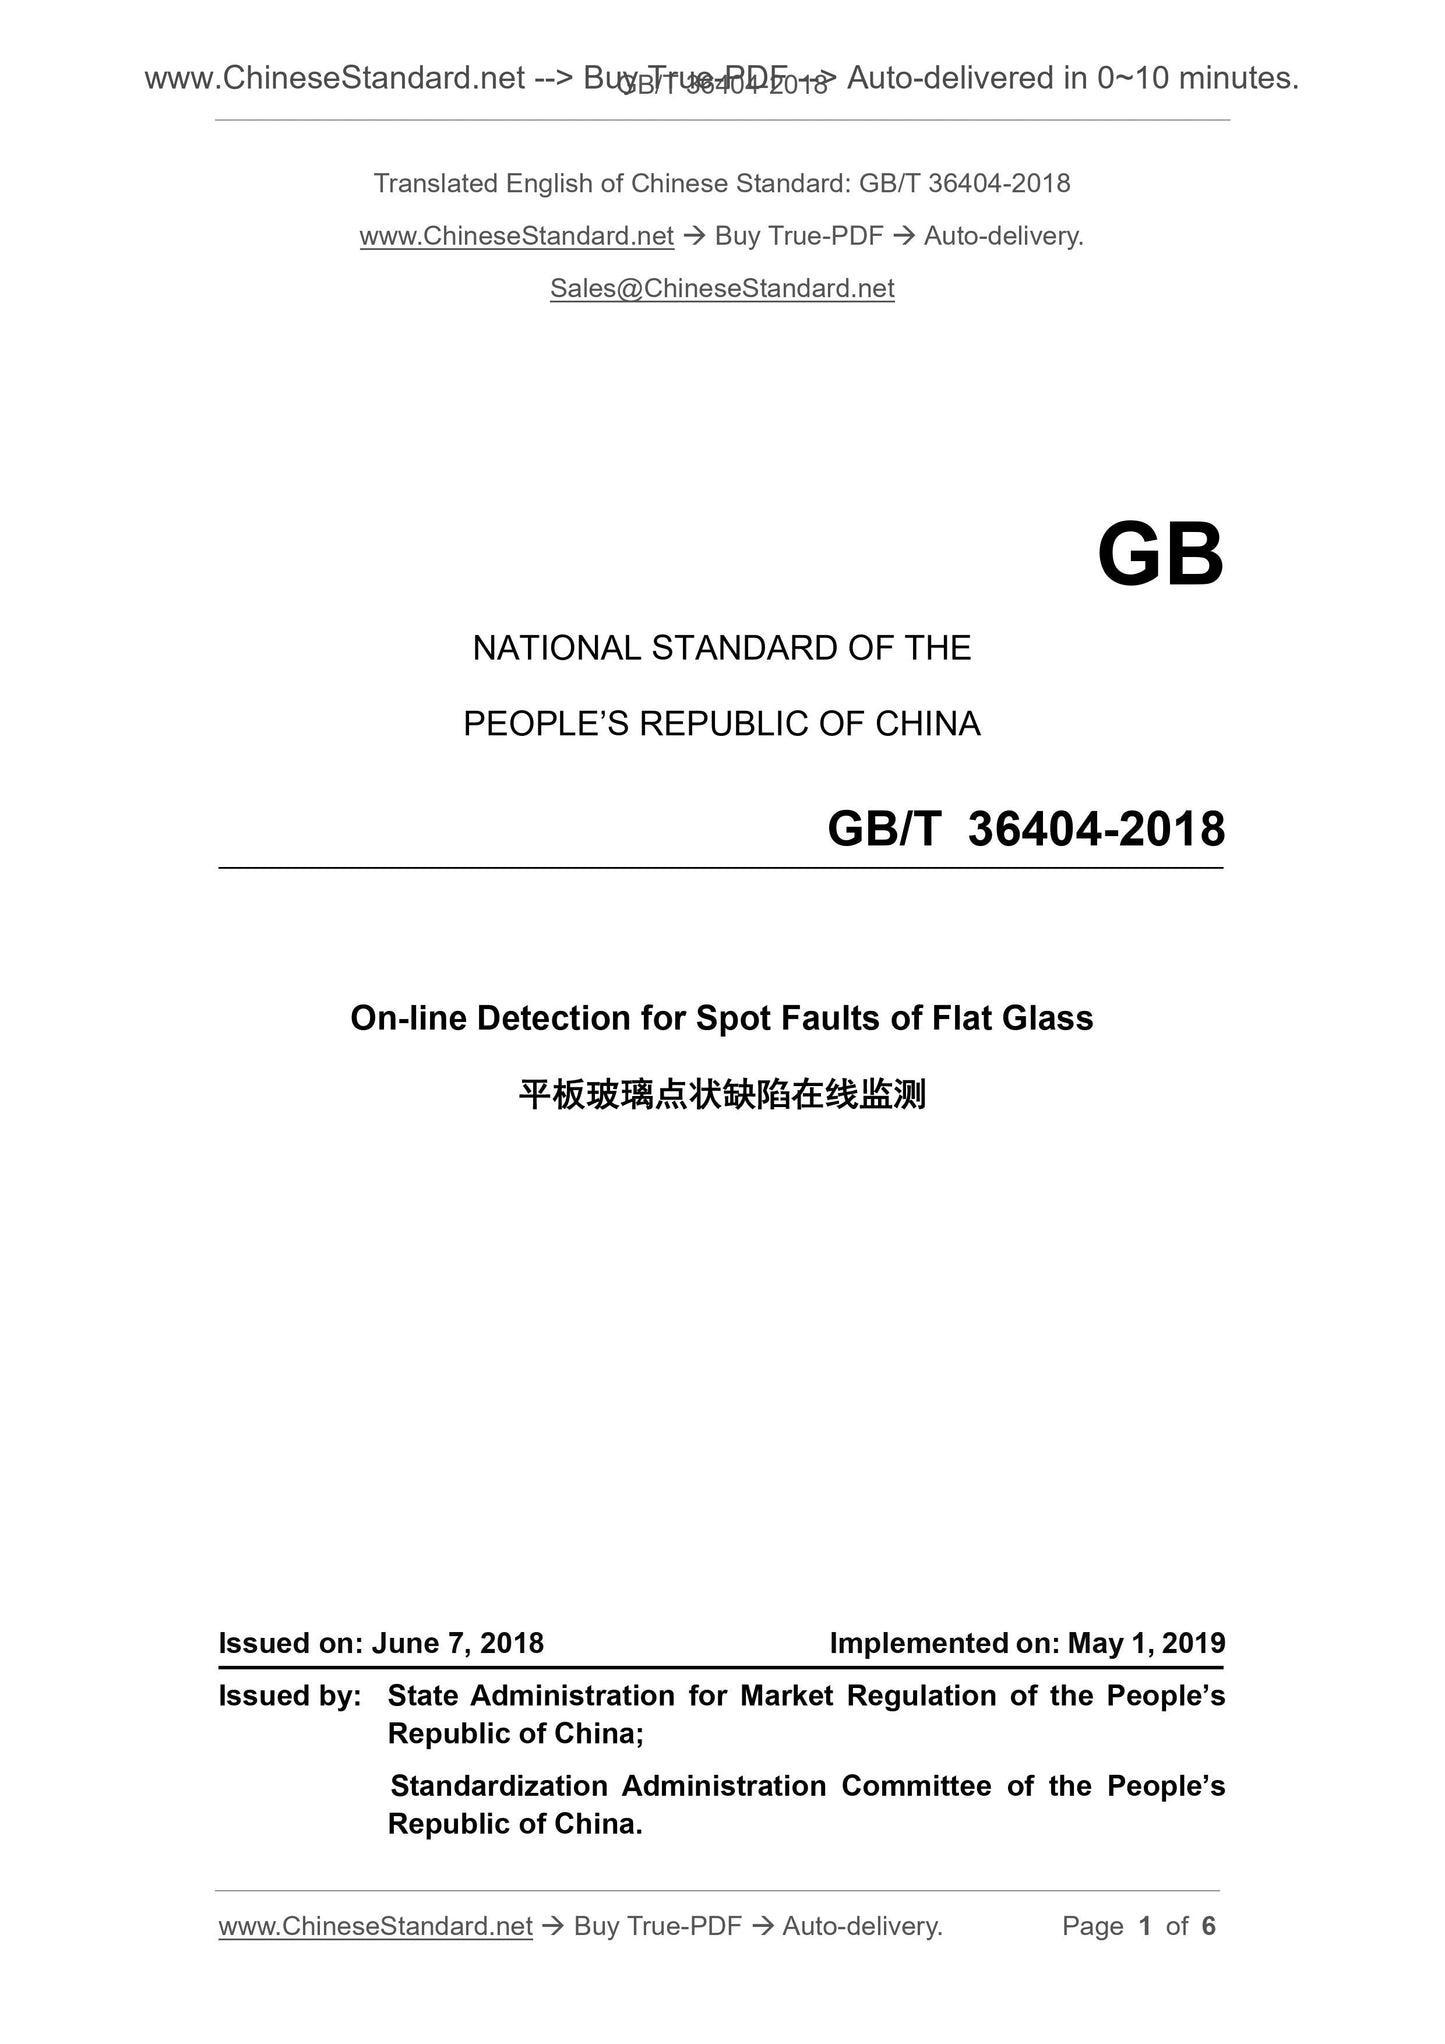 GB/T 36404-2018 Page 1